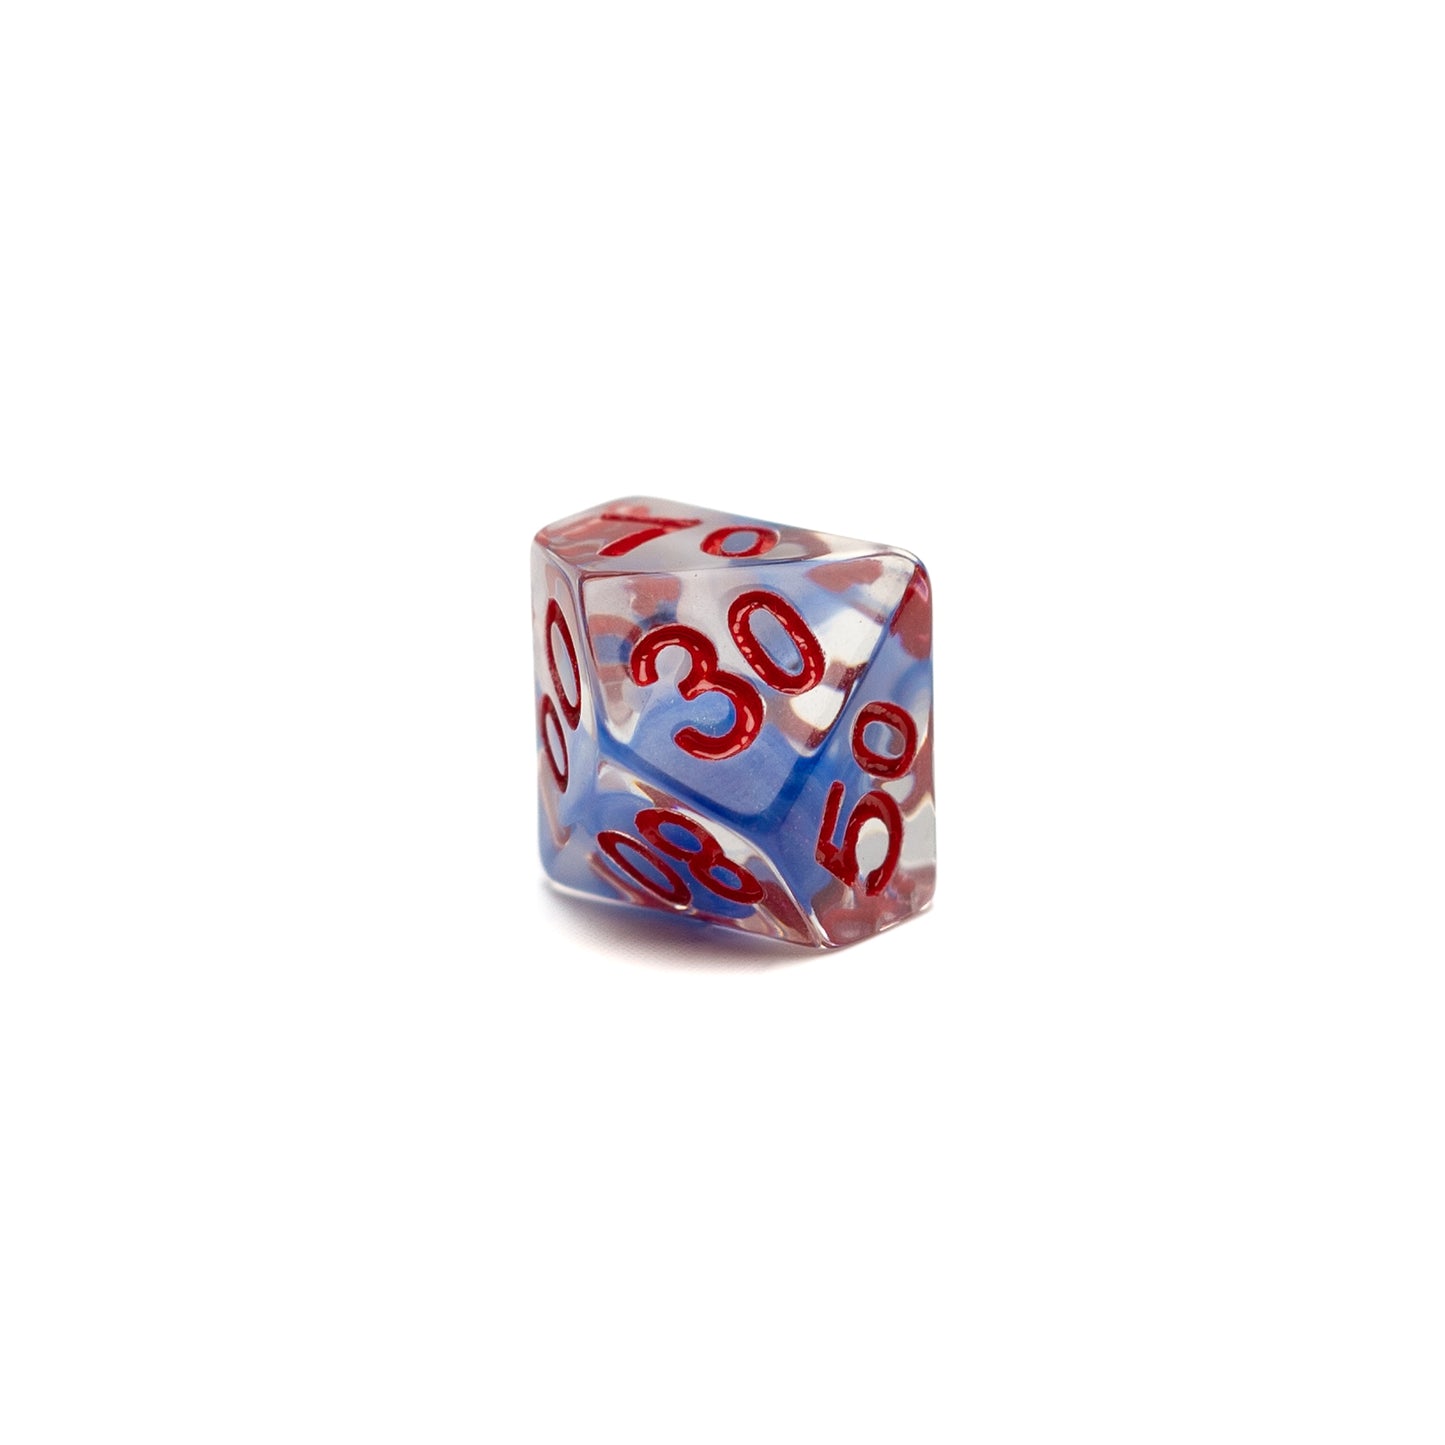 Roll Britannia Acrylic Dungeons and Dragons D10 Percentile Dice with Red and Blue Ocean Aesthetic